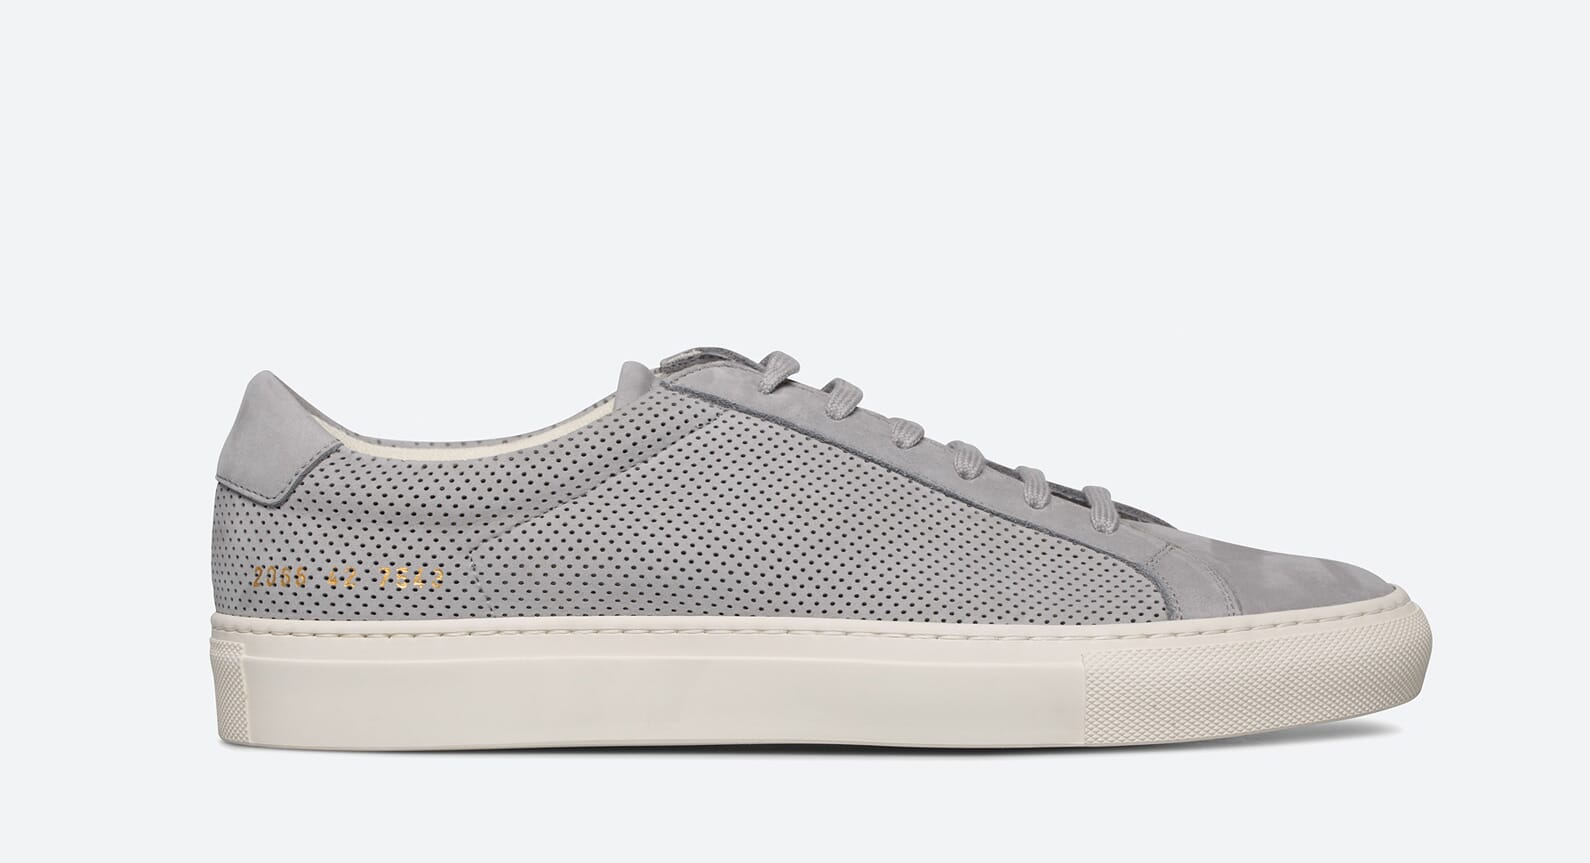 Introducing The Common Projects Summer Edition Sneaker